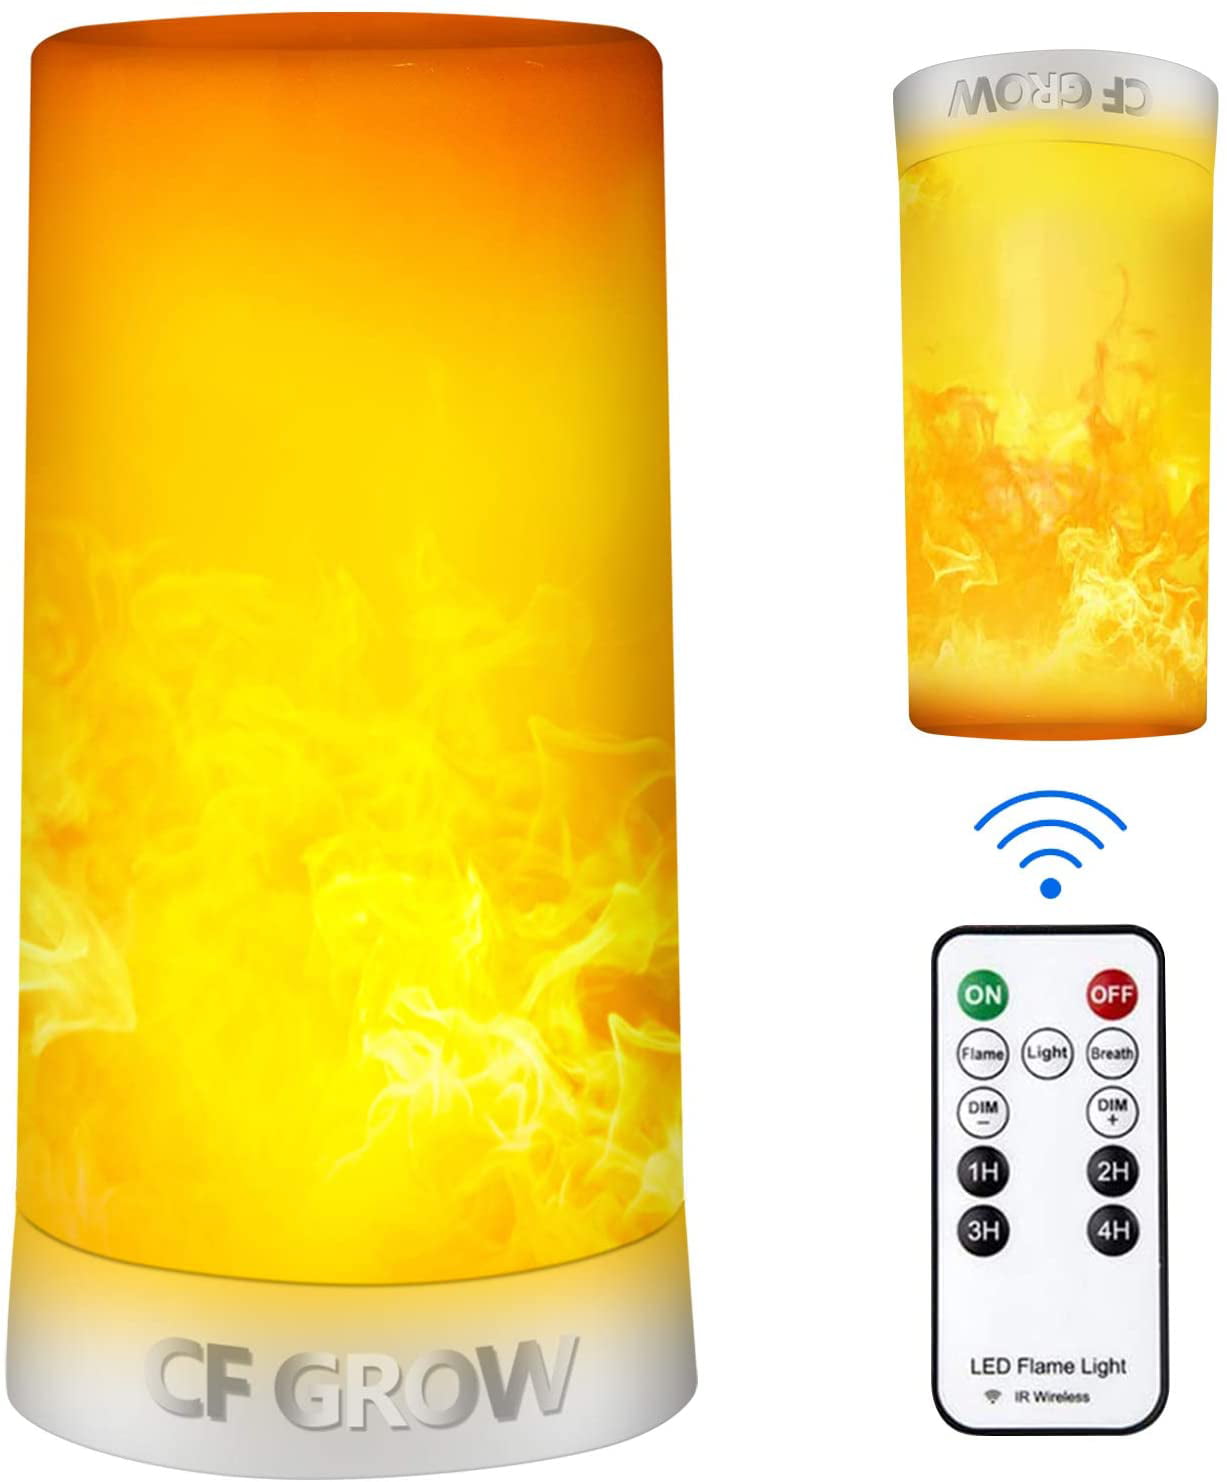 Led Flame Effect Light Usb, Flame Effect Table Lamps